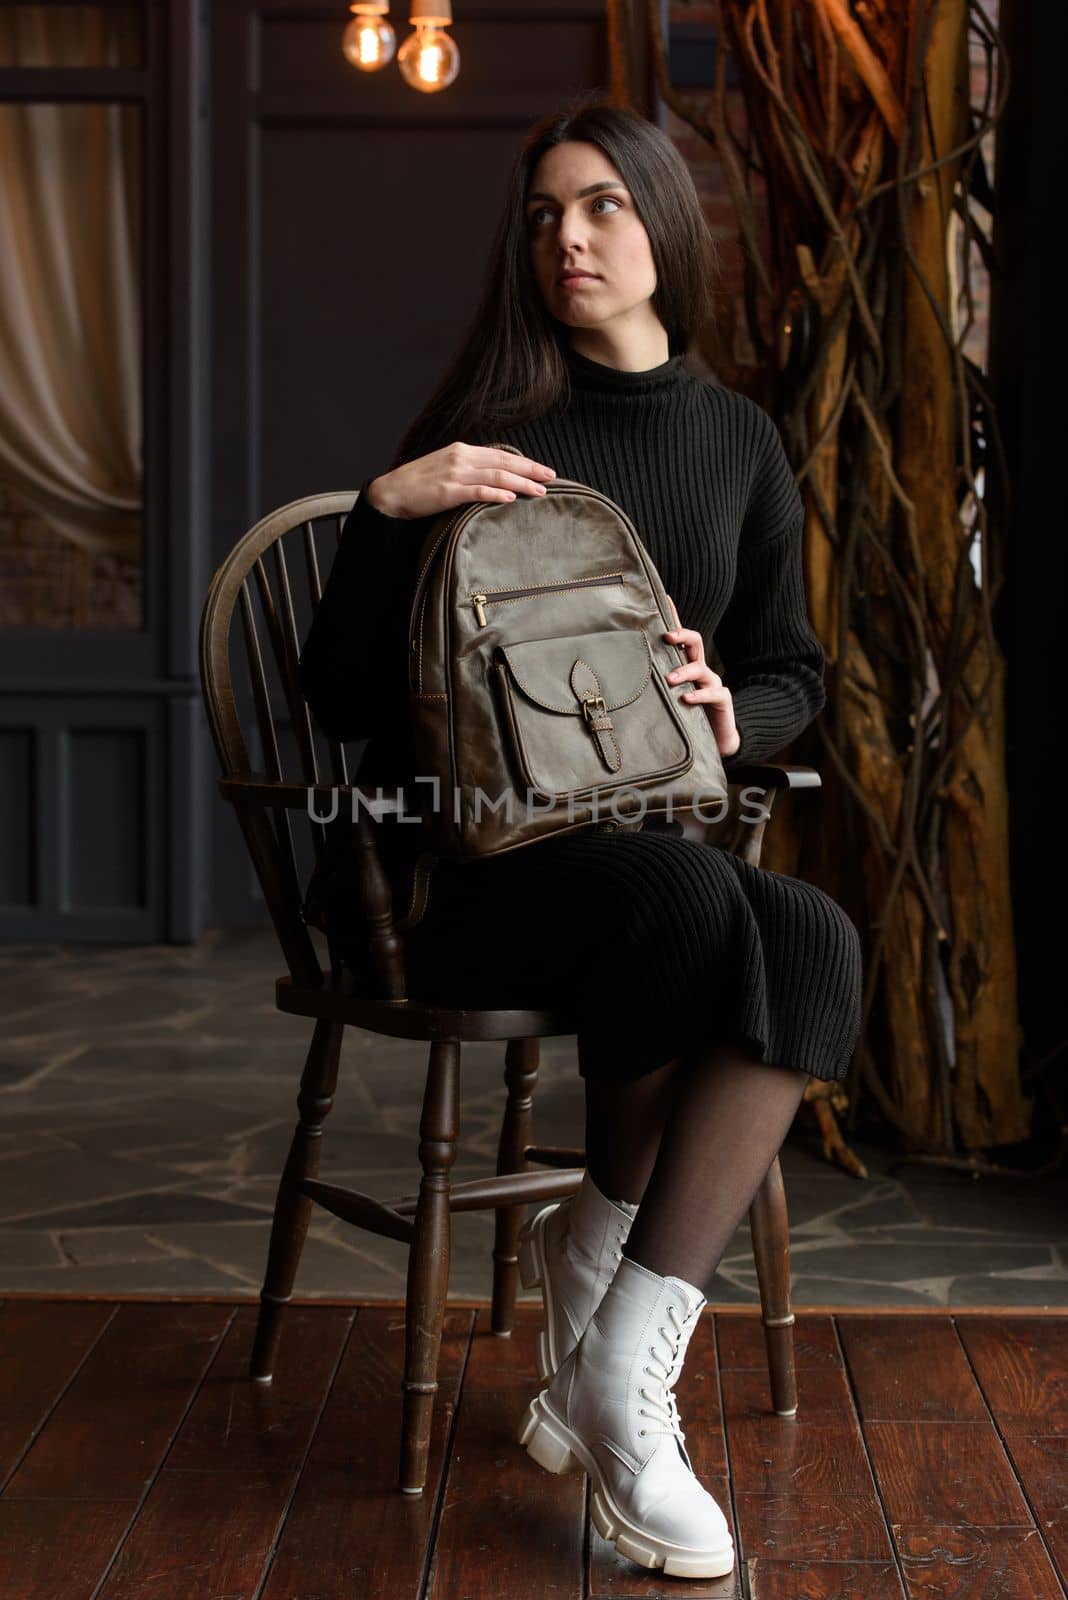 a brunette girl in a knitted black dress poses while sitting with a shiny brown leather backpack in her hands